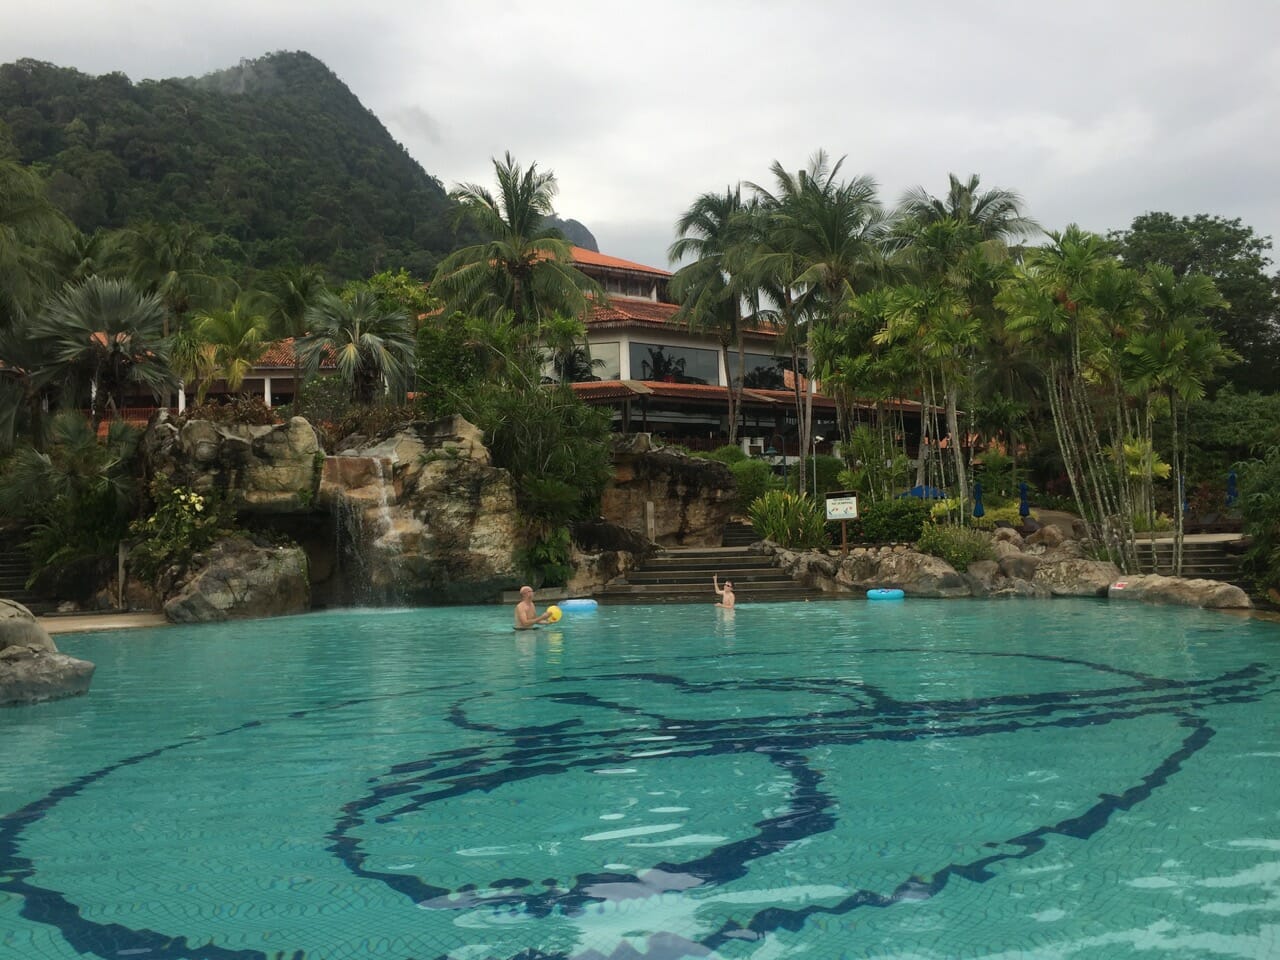 Berjaya Langkawi Resort swimming pool backed up by coconut trees, a building and mountains covered with vegetation